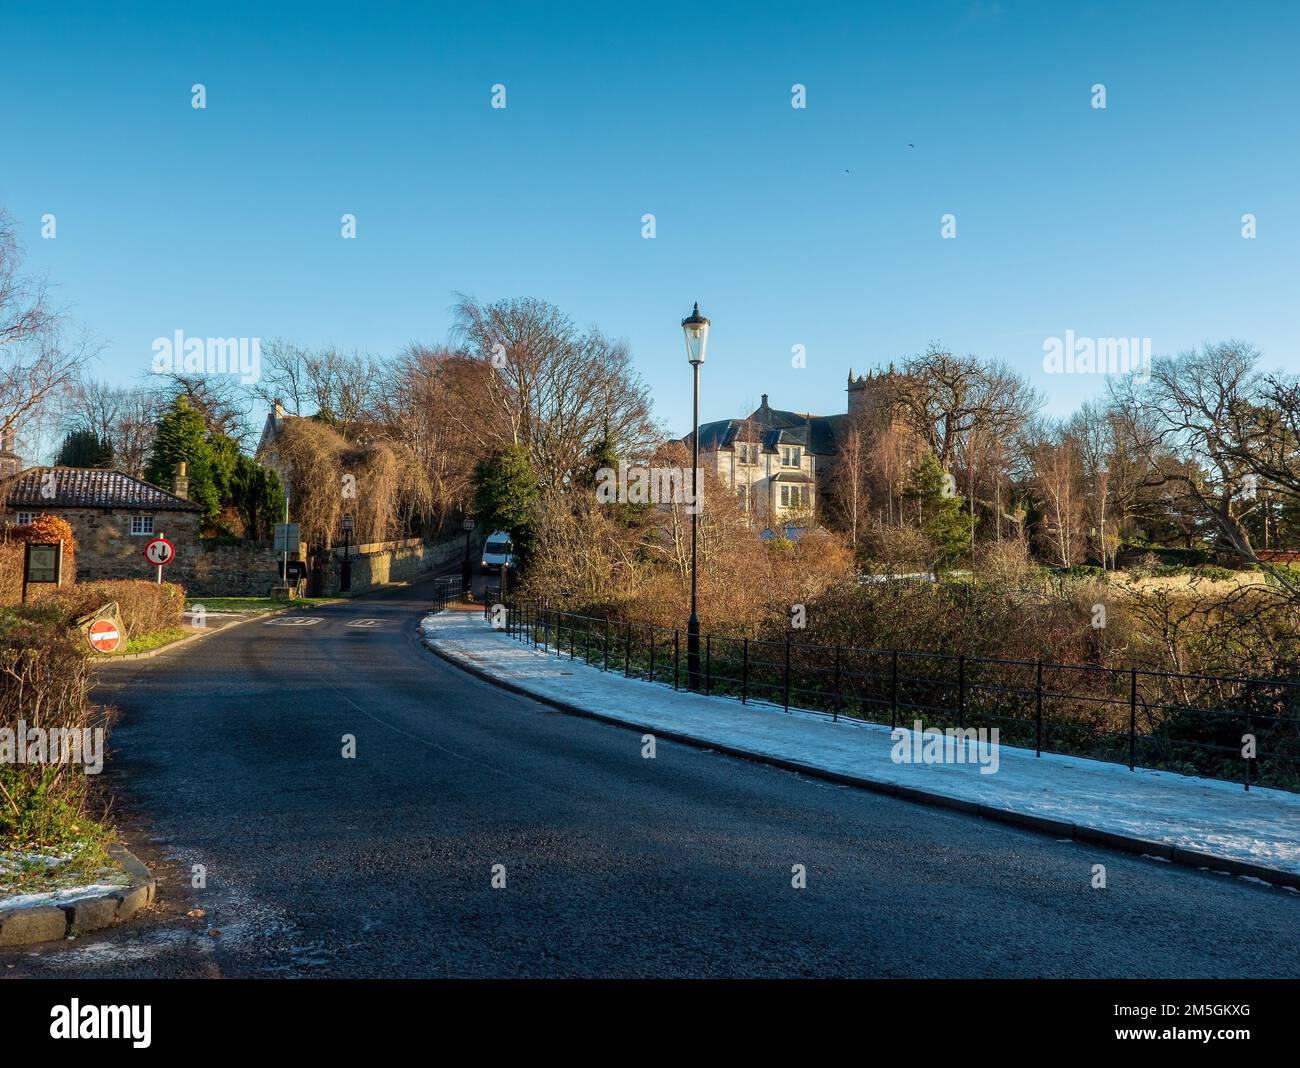 View of Duddingston Village Church and road leading towards Duddingston Village with snow on the footpath Stock Photo